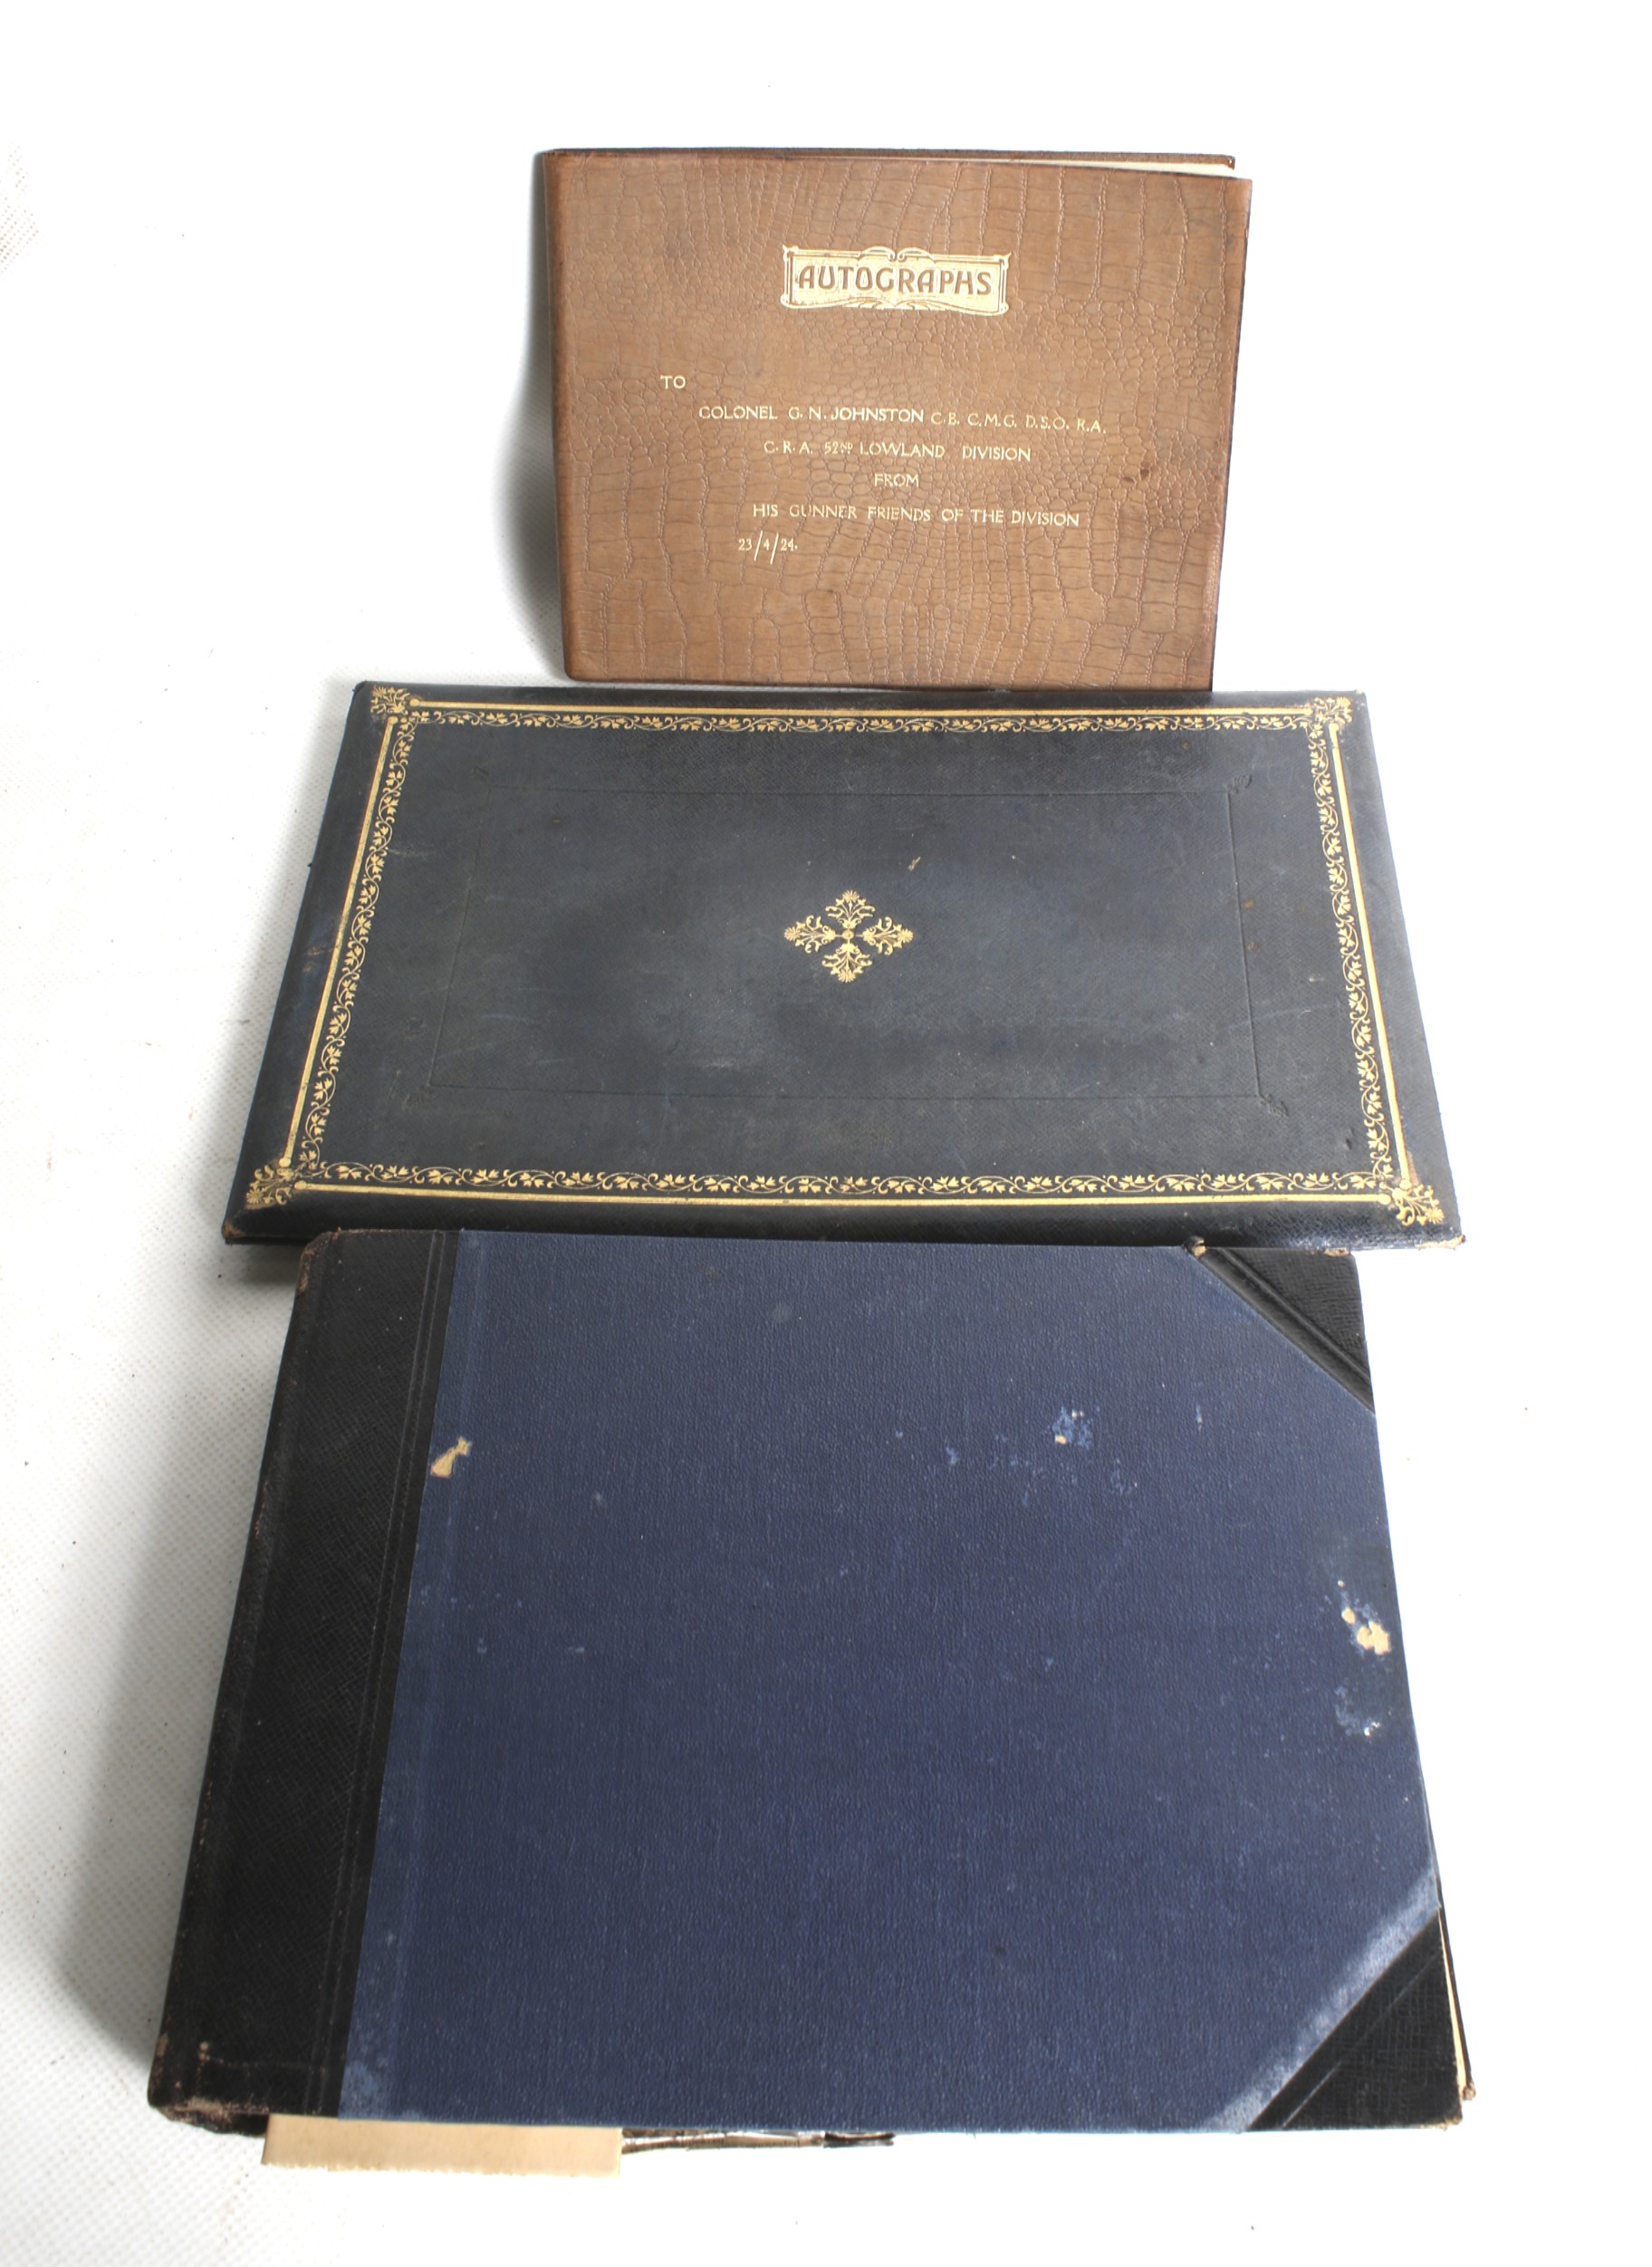 A circa 1900 album of photographs and ephemera, an autograph book and a certificate of thanks.